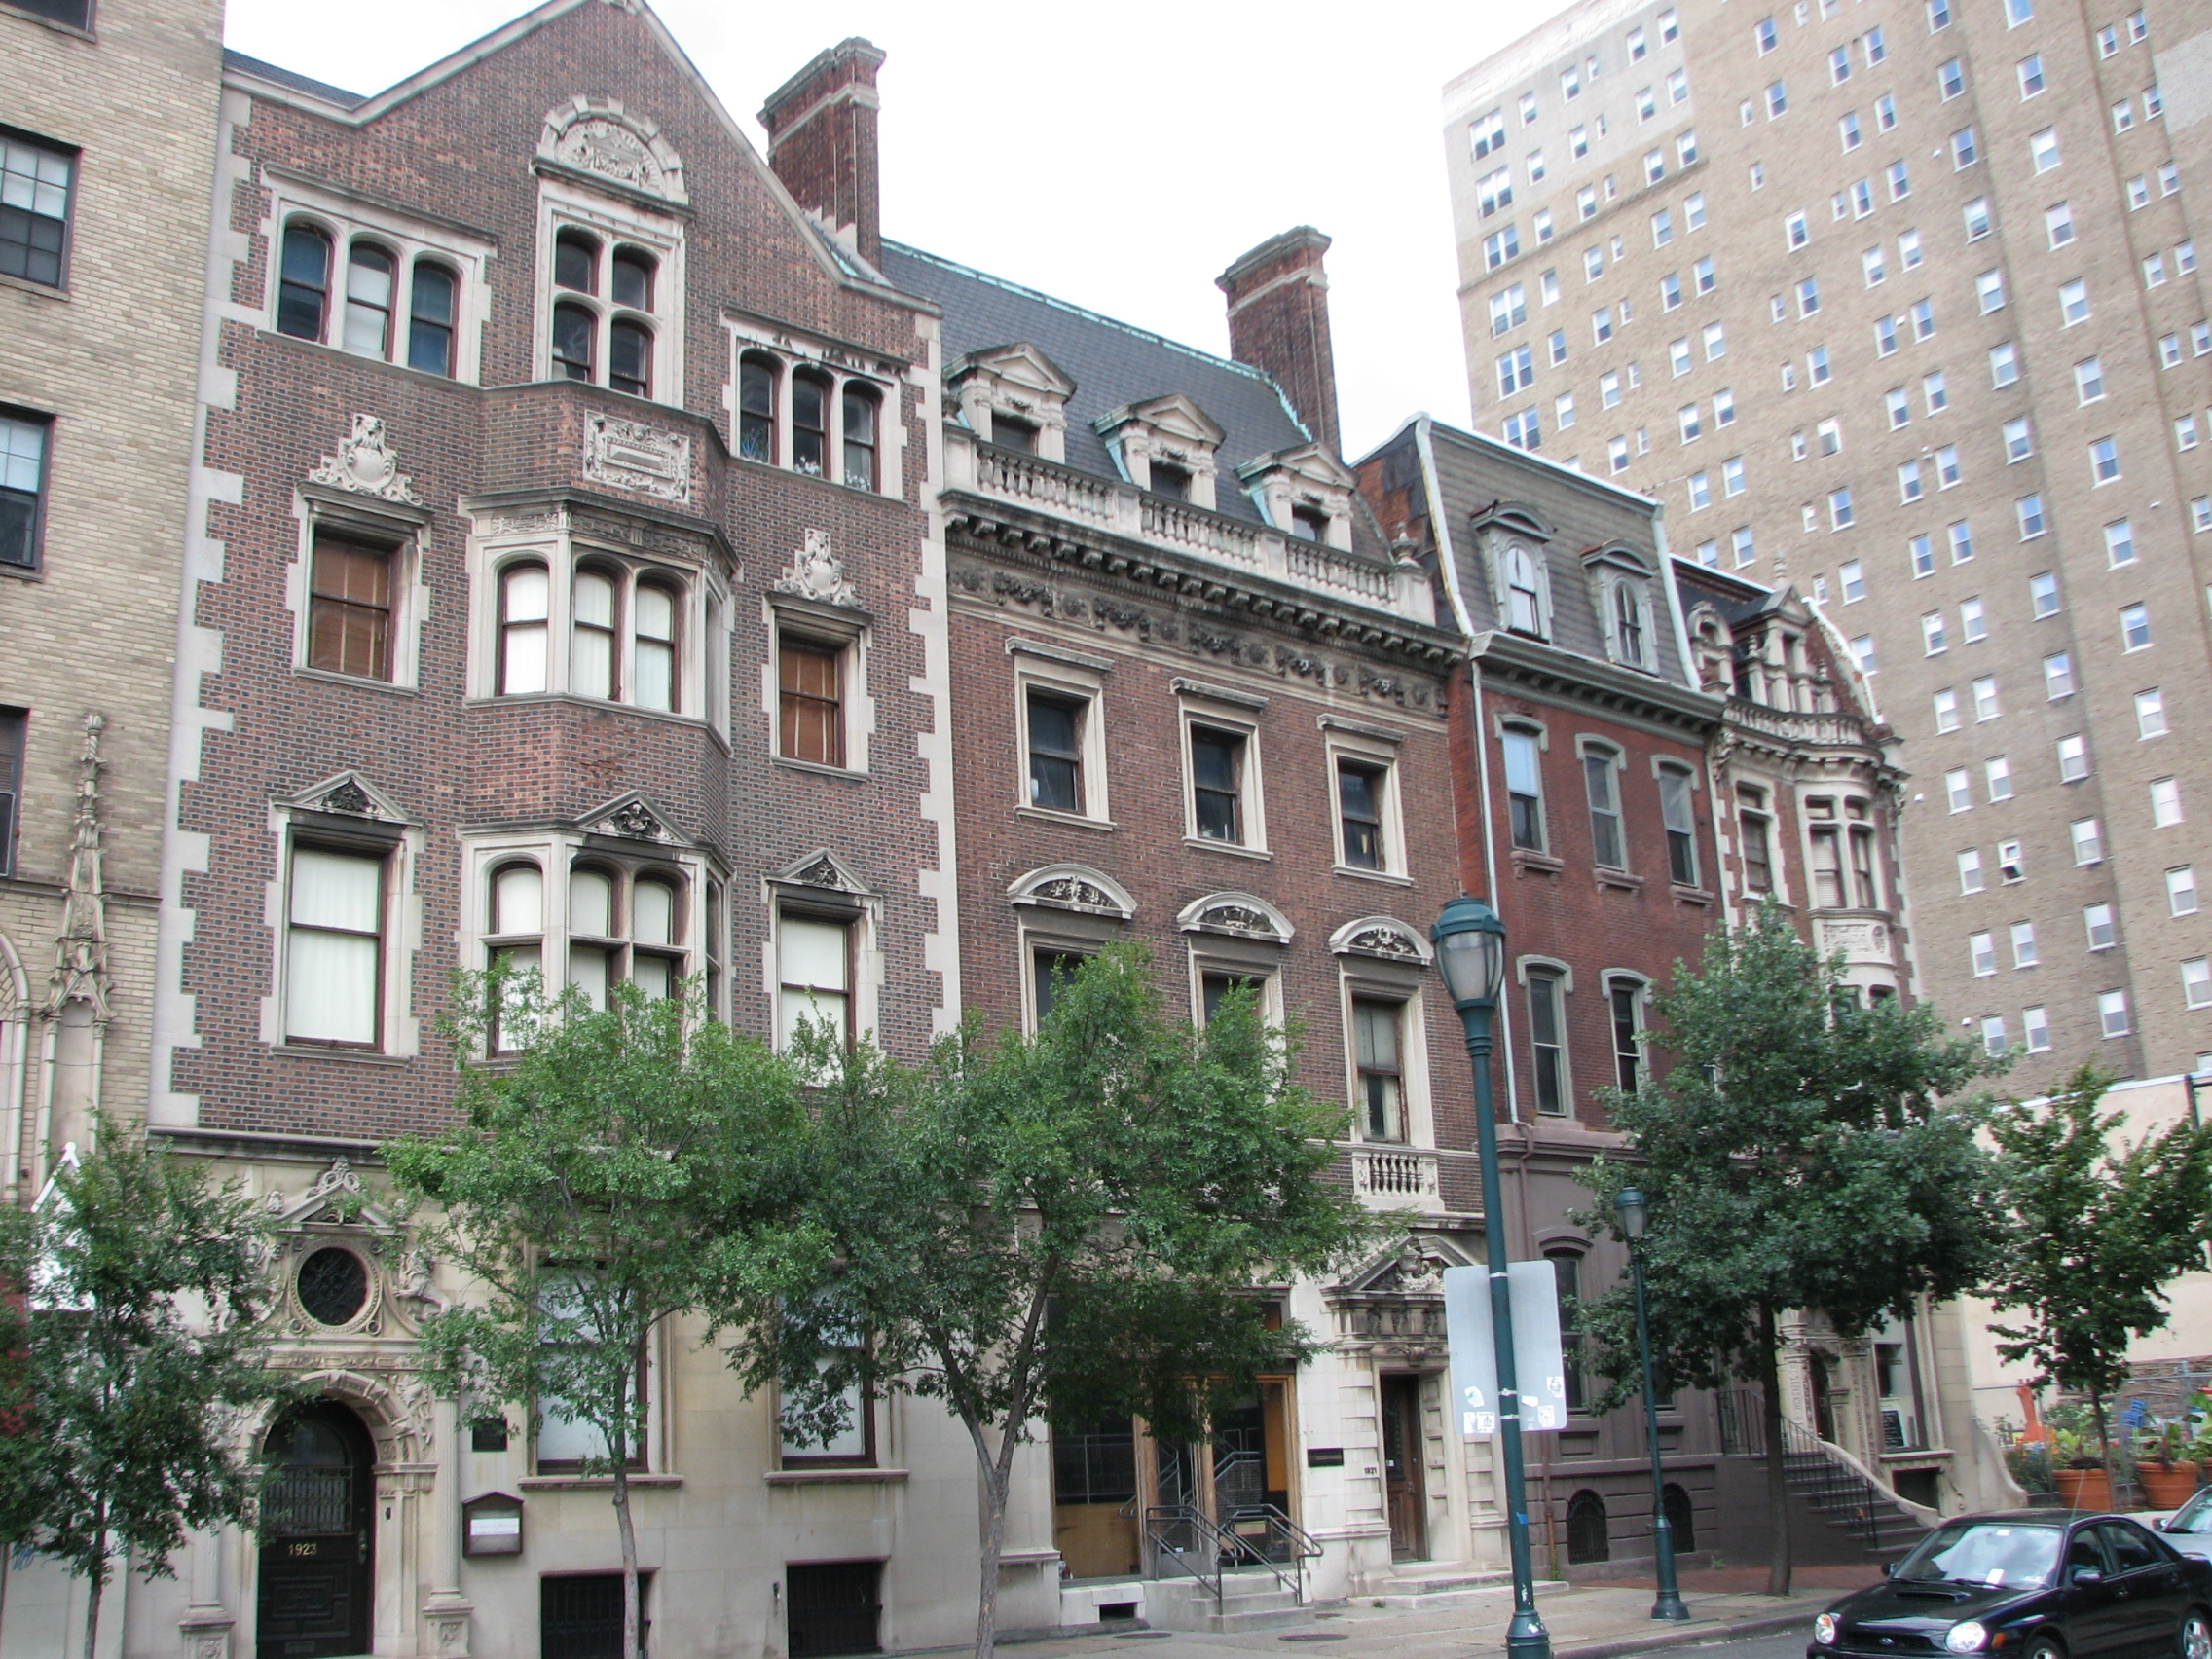 The buildings along the 1900 block of Walnut have survived decades of residential and commercial evolution.